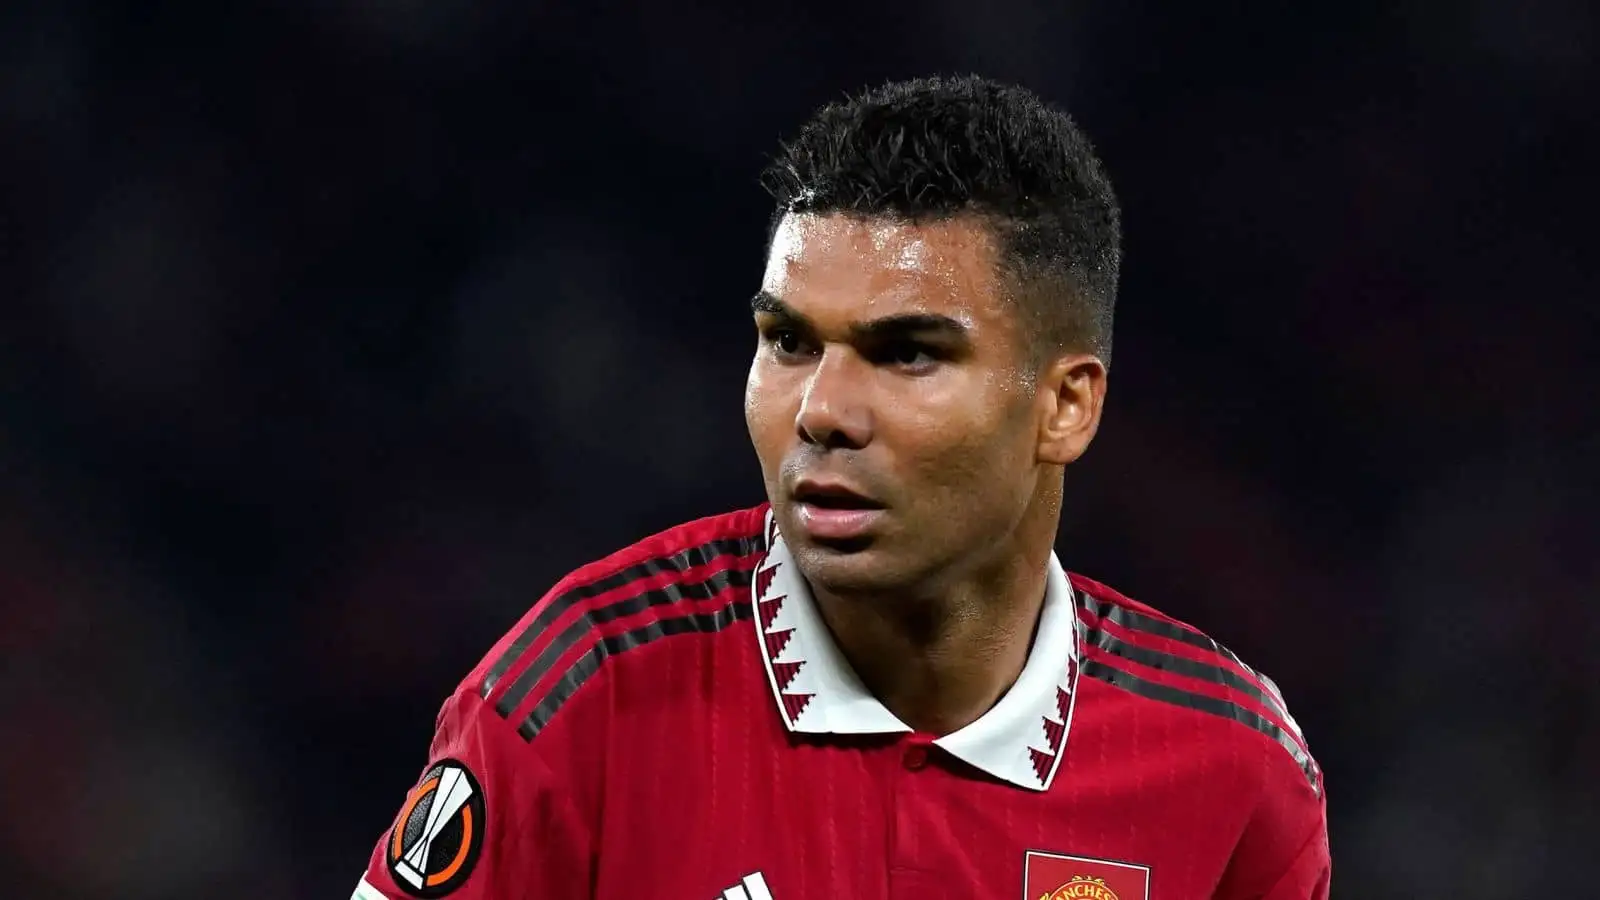 Casemiro of Manchester United during the UEFA Europa League match at Old Trafford, Manchester.